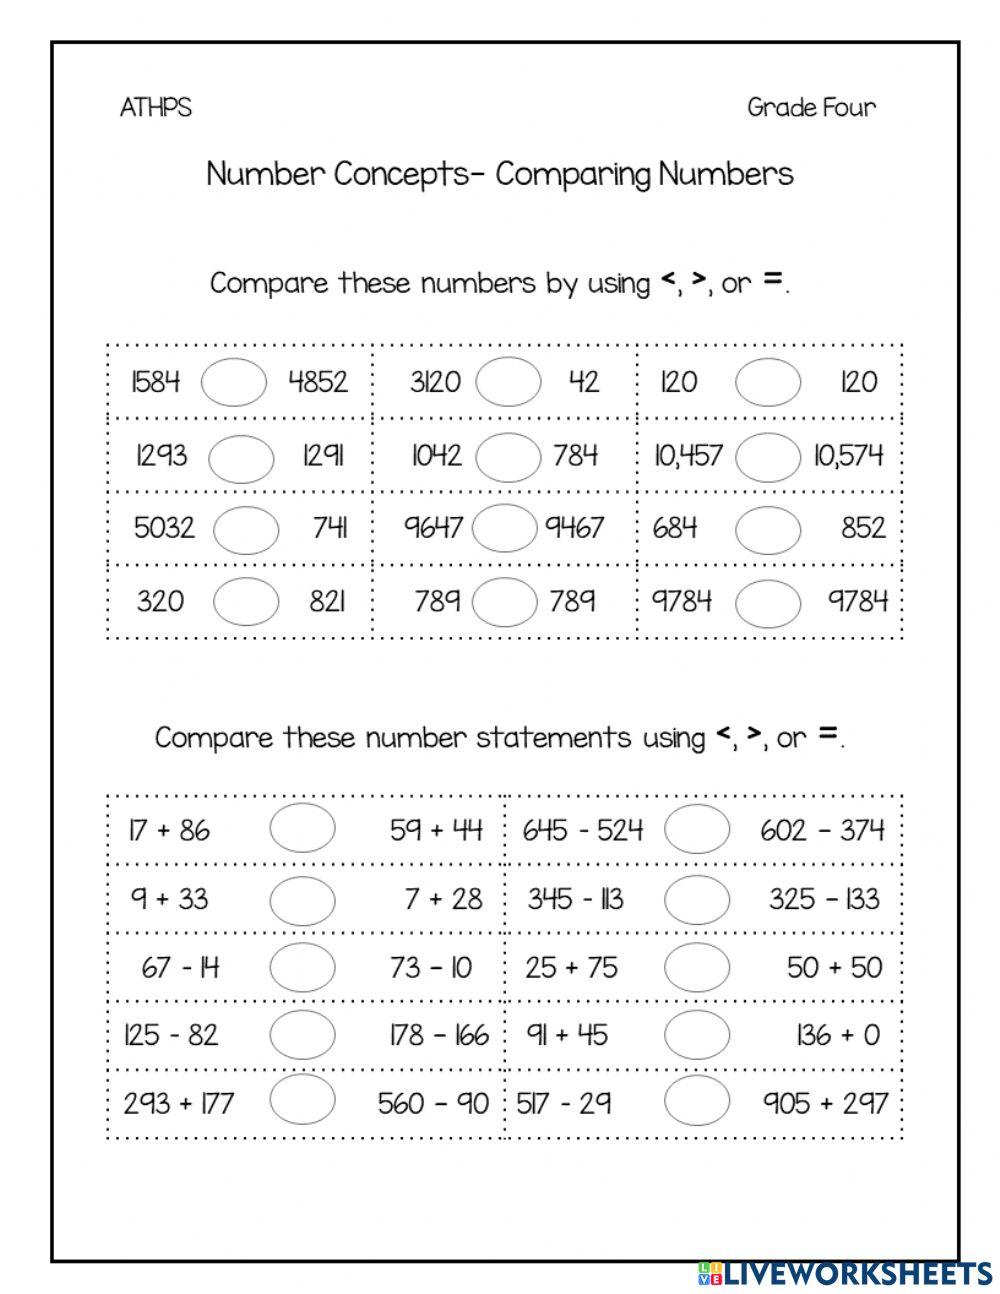 Comparing Numbers- Number Concepts